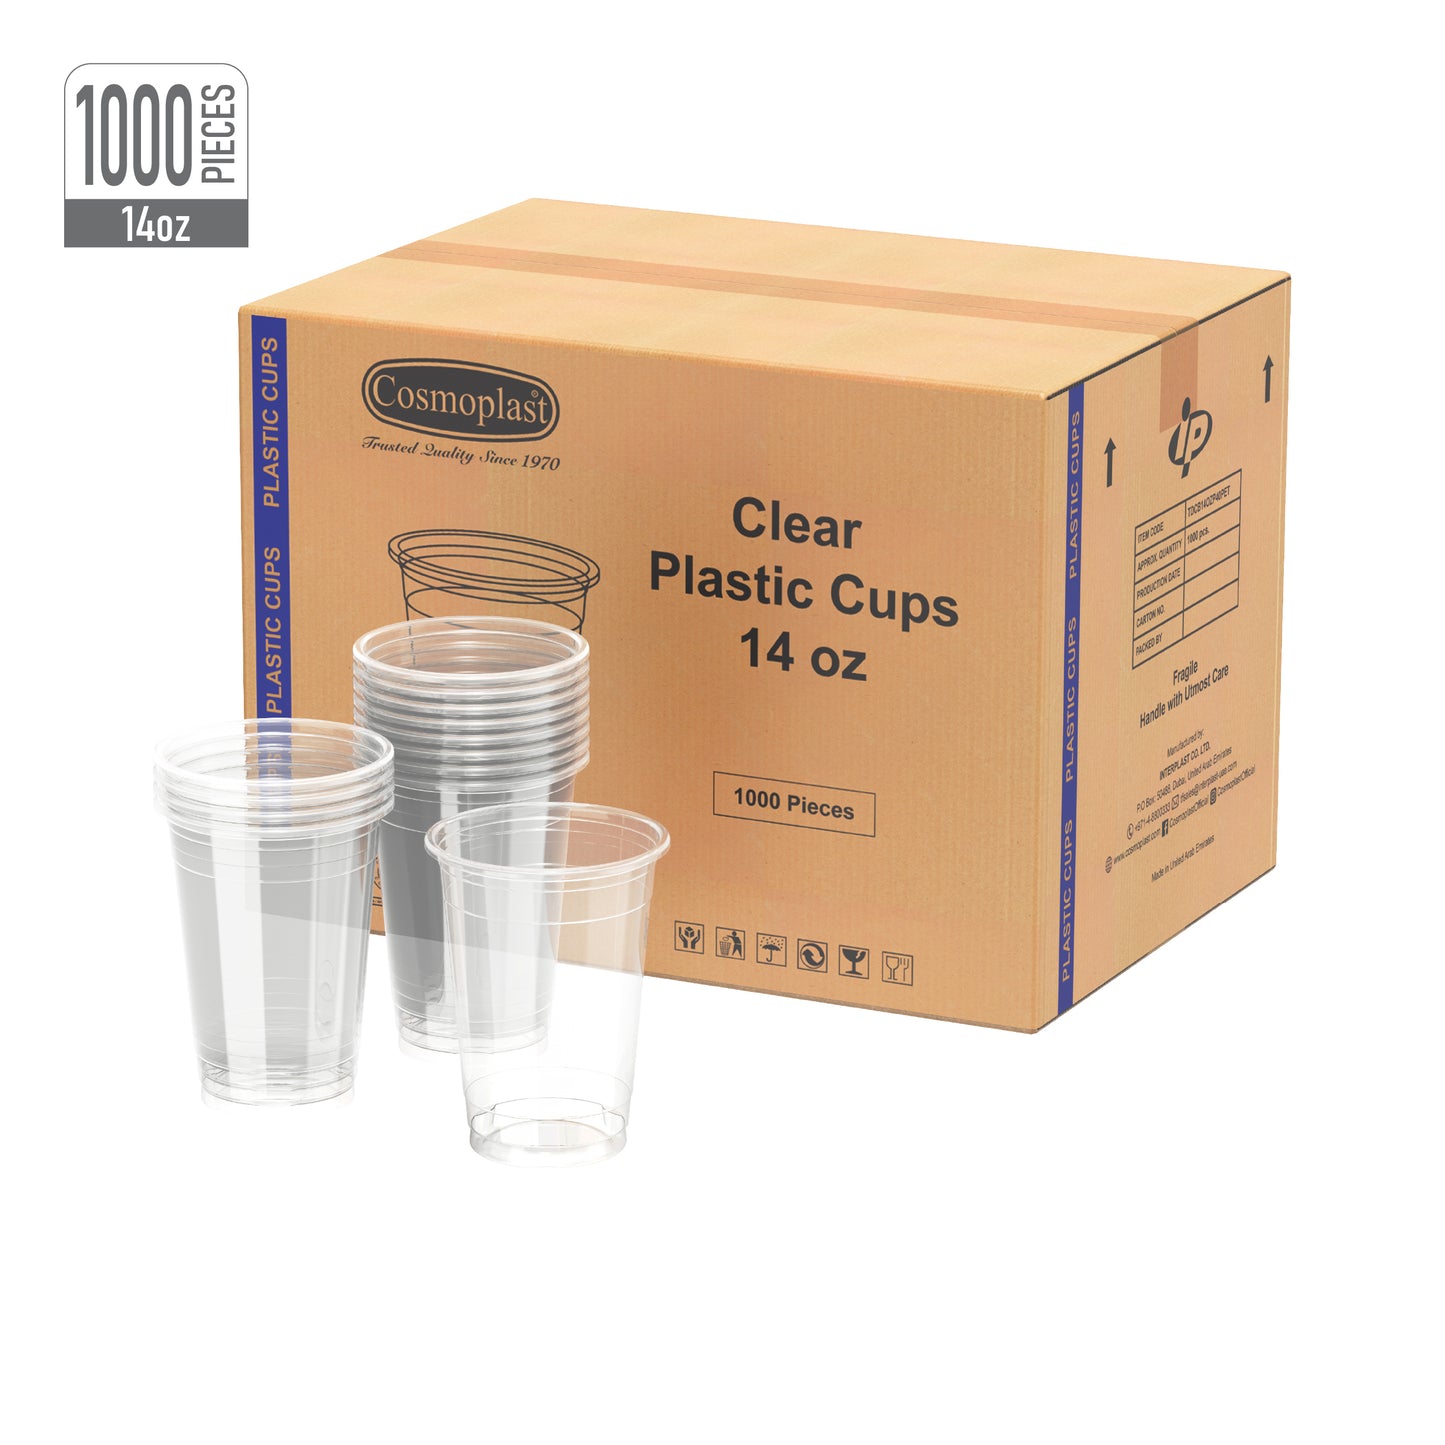 14 oz Clear Plastic Cups Carton of 1000